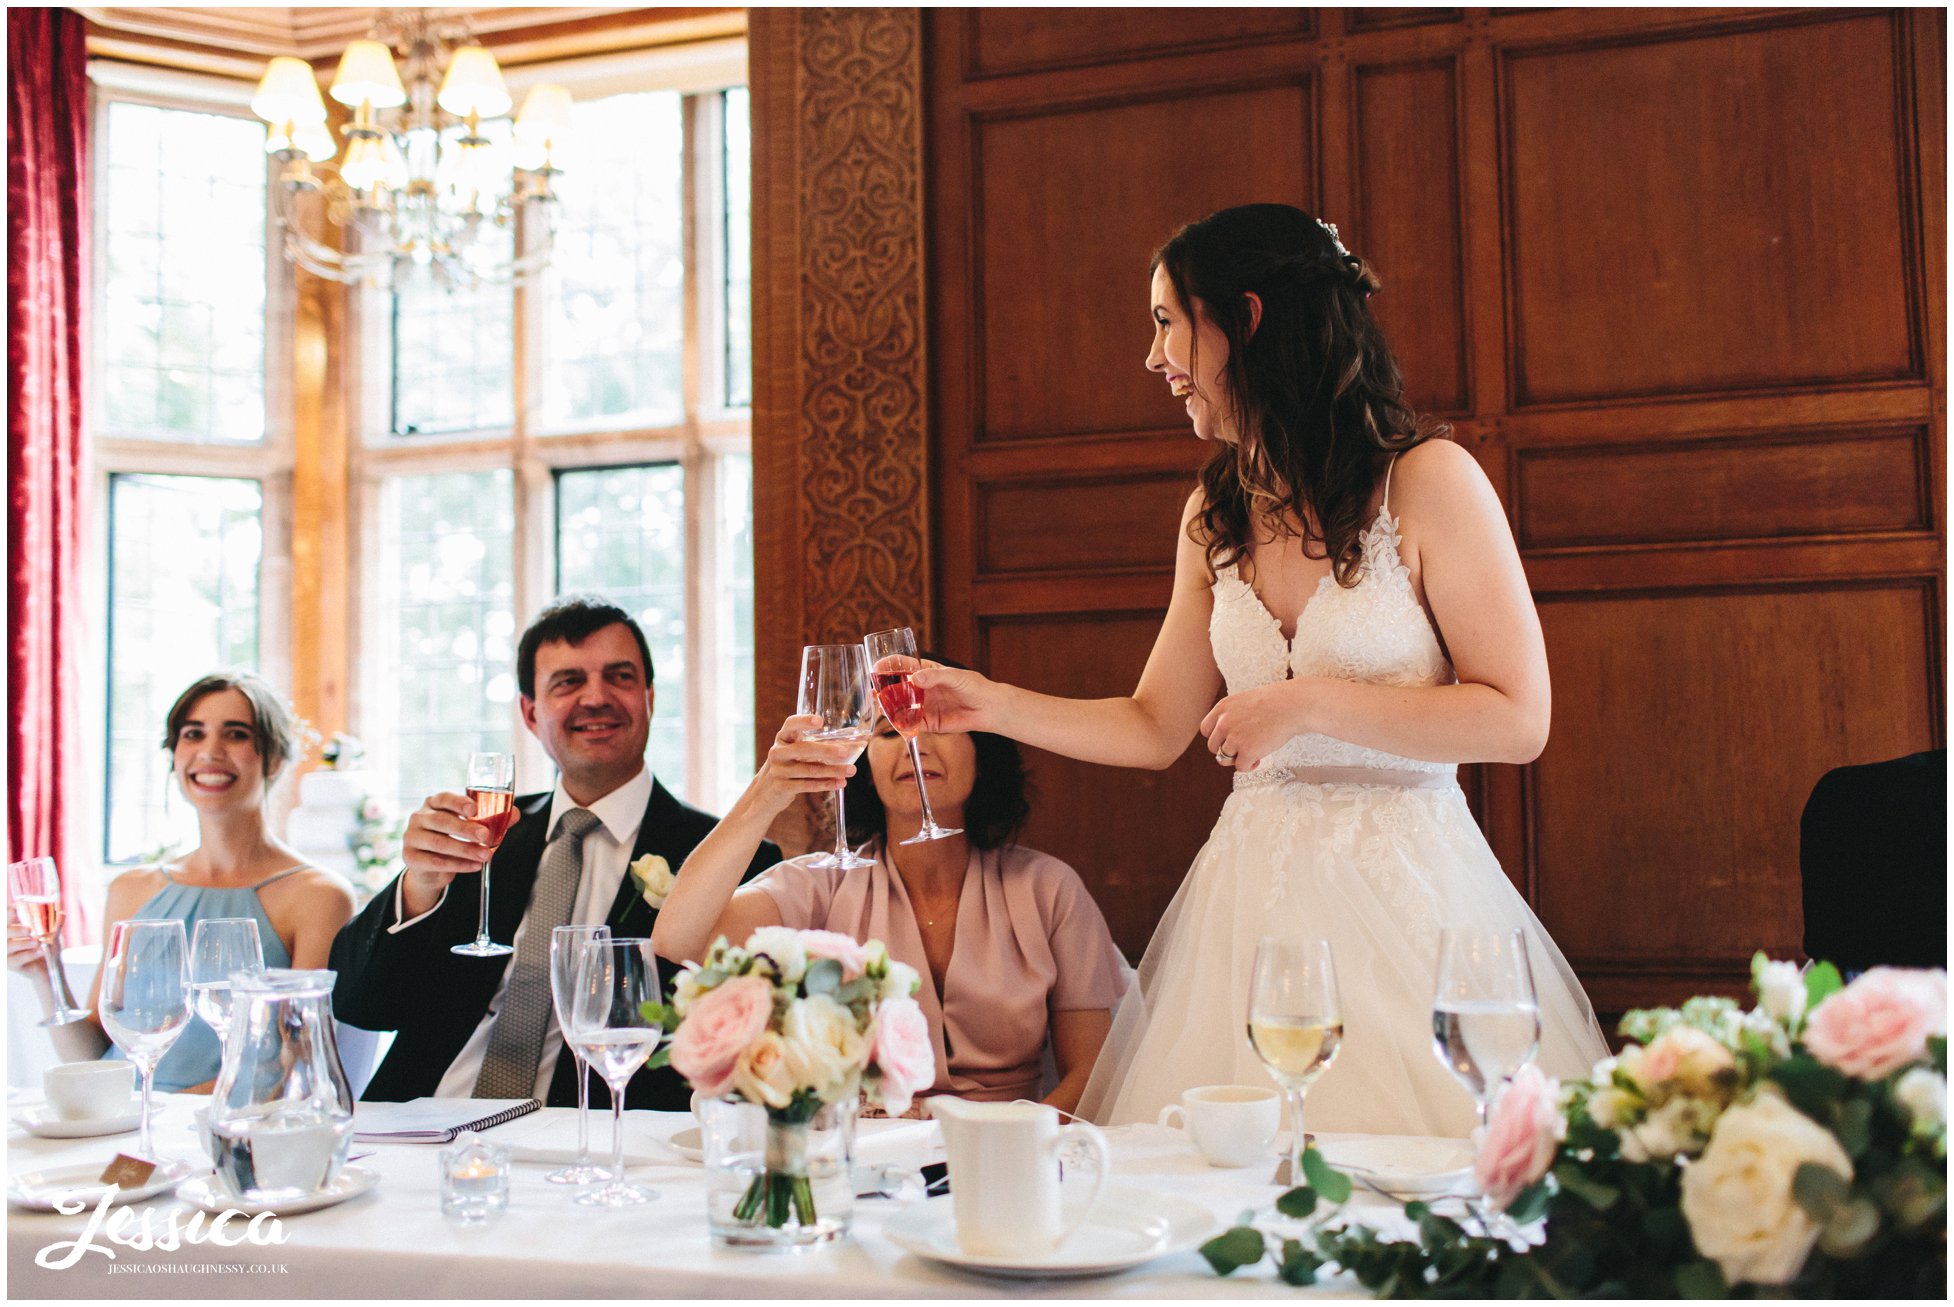 the bride cheers with her family to toast the speakers